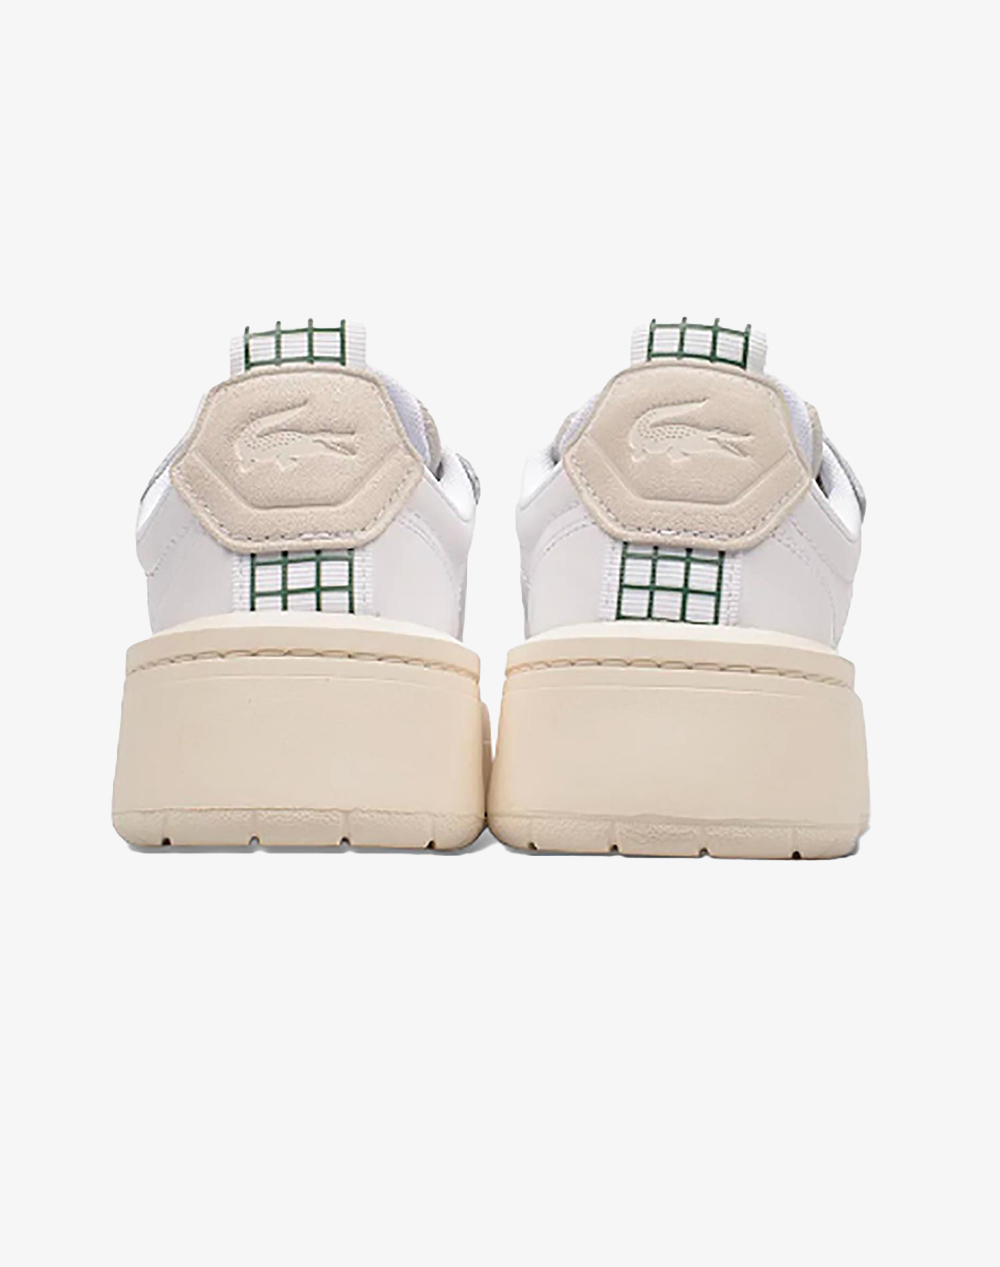 LACOSTE WOMENS SHOES CARNABY PLAT 123 1 SFA CARNABY PLAT 123 1 SFA